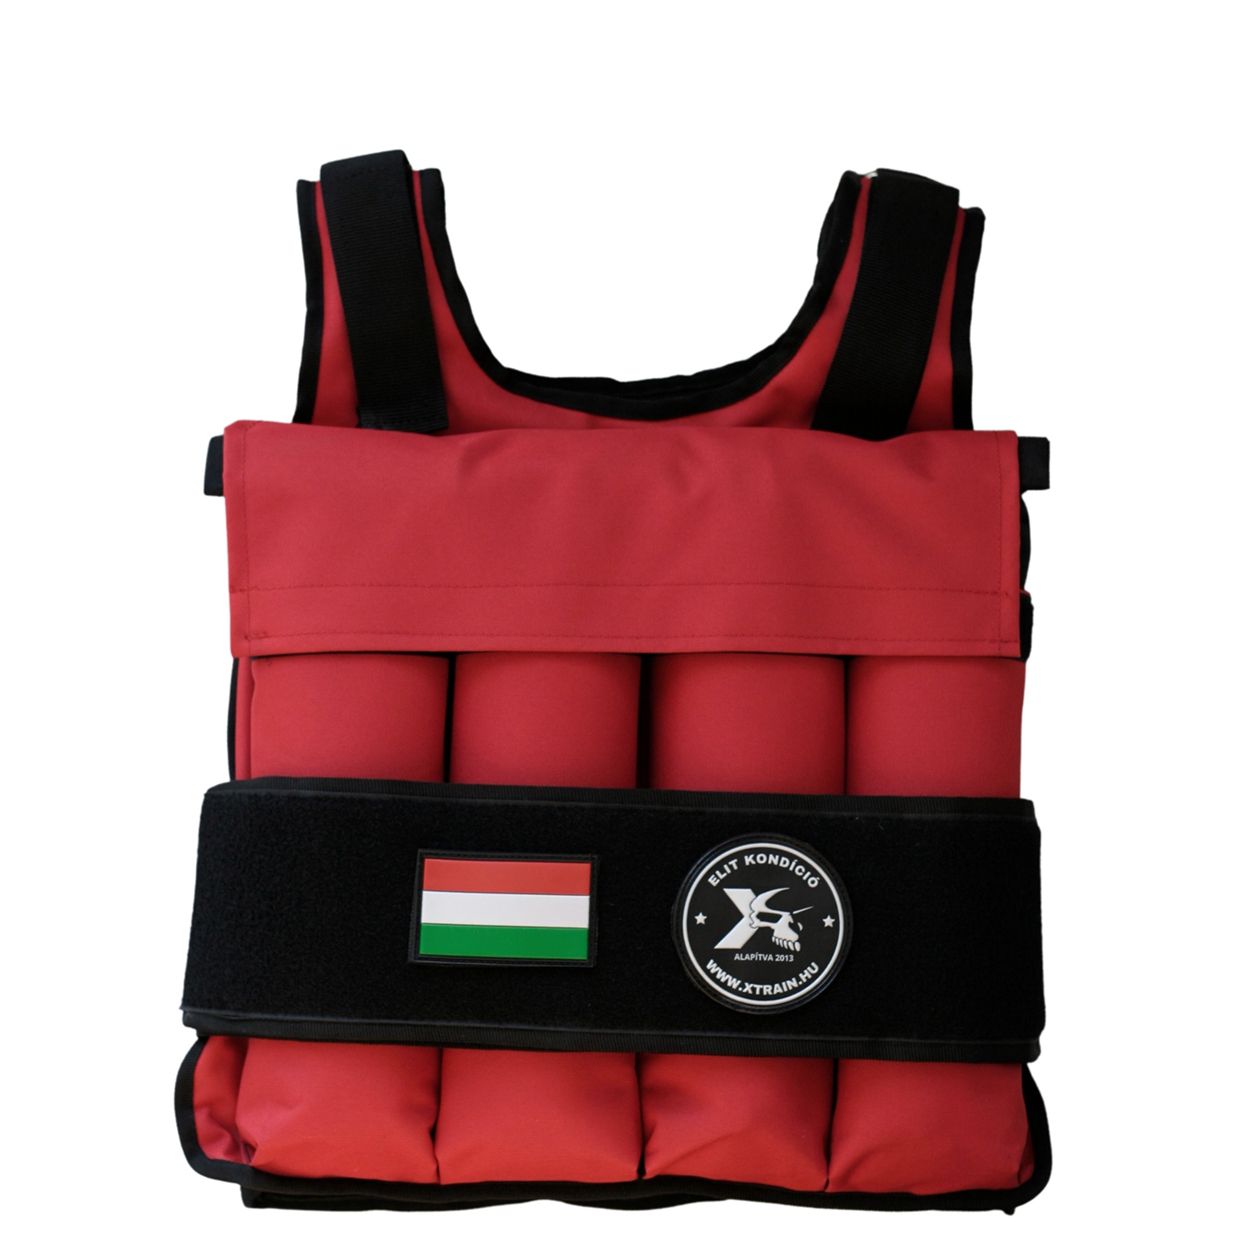 XTRAIN PROFESSIONAL TRAINING - PRO WEIGHTED VEST 3.0 PATCH EDITION - SÚLYMELLÉNY - 20 KG - PIROS/FEKETE